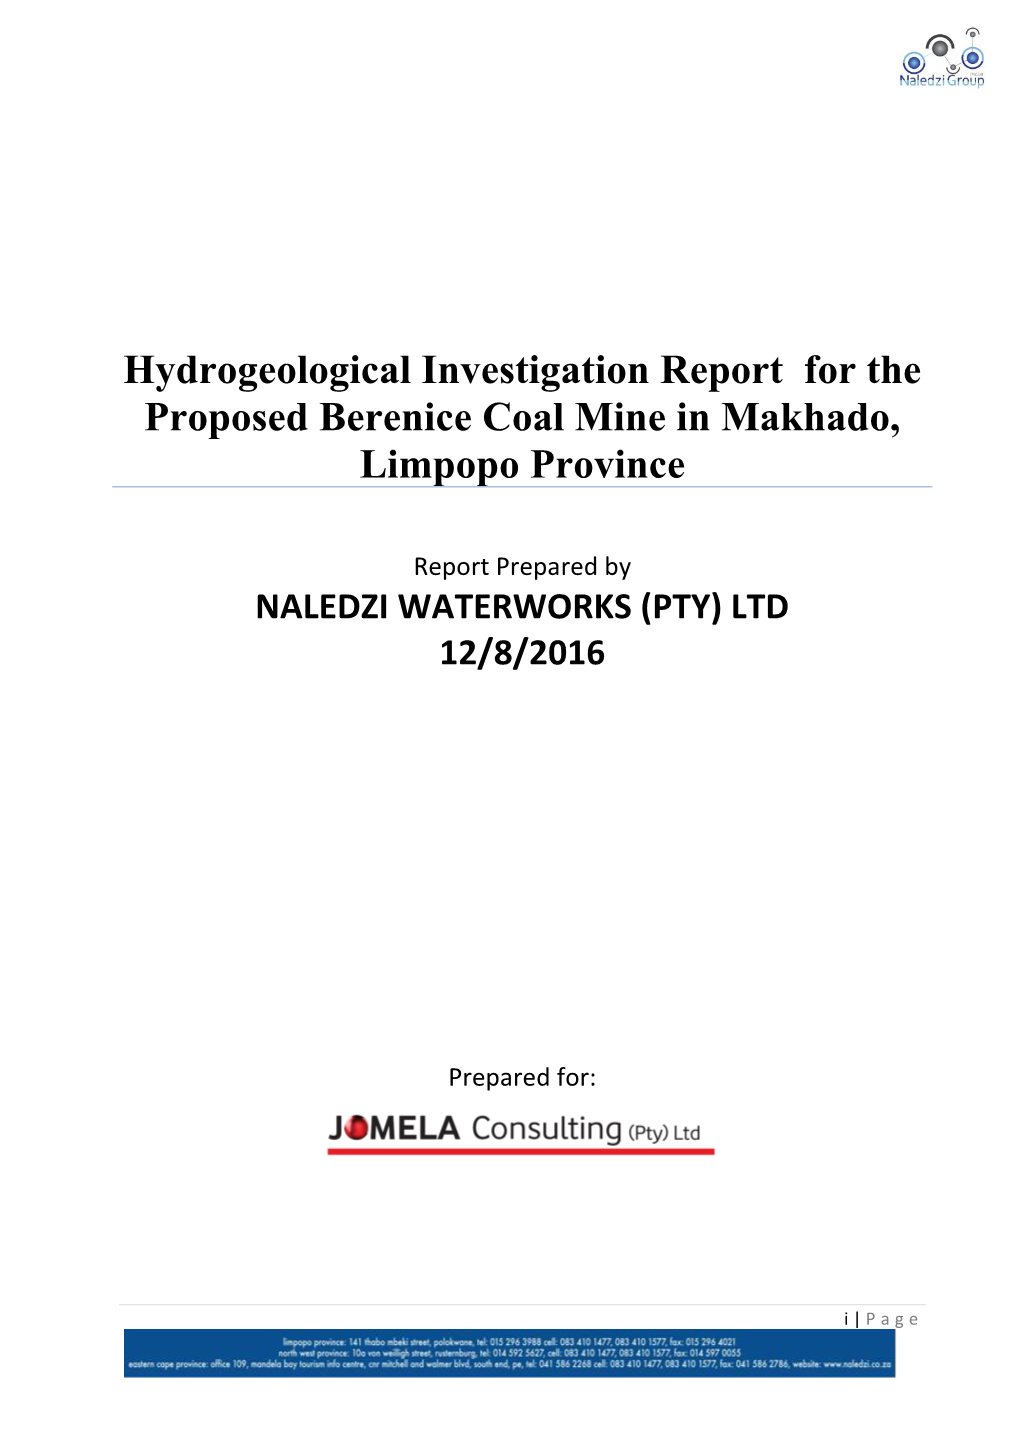 Hydrogeological Investigation Report for the Proposed Berenice Coal Mine in Makhado, Limpopo Province